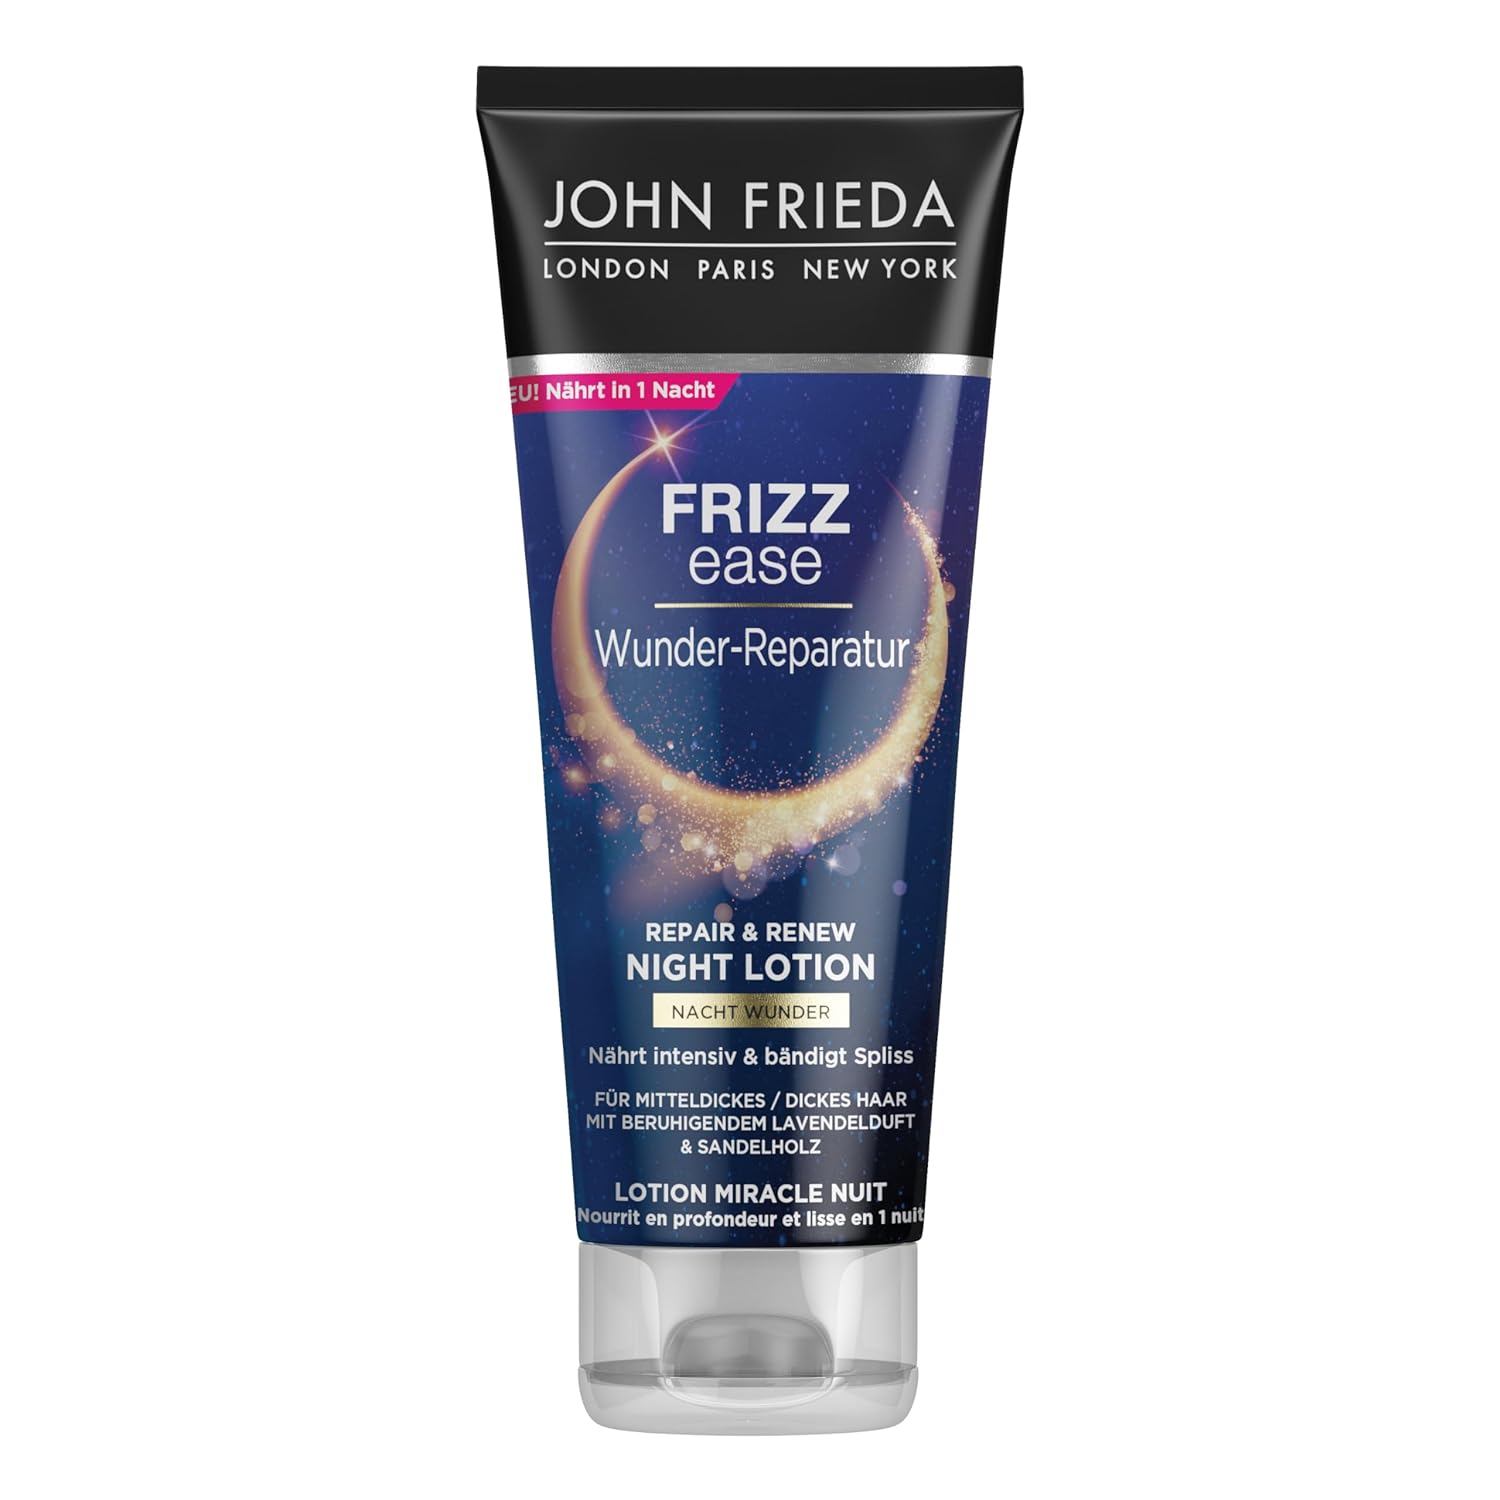 John Frieda Miracle Repair Night Wonder Hair Lotion - Content: 100 ml - Frizz Ease Series - For Medium Thick/Thick Hair - Intensely Nourishes in 1 Night